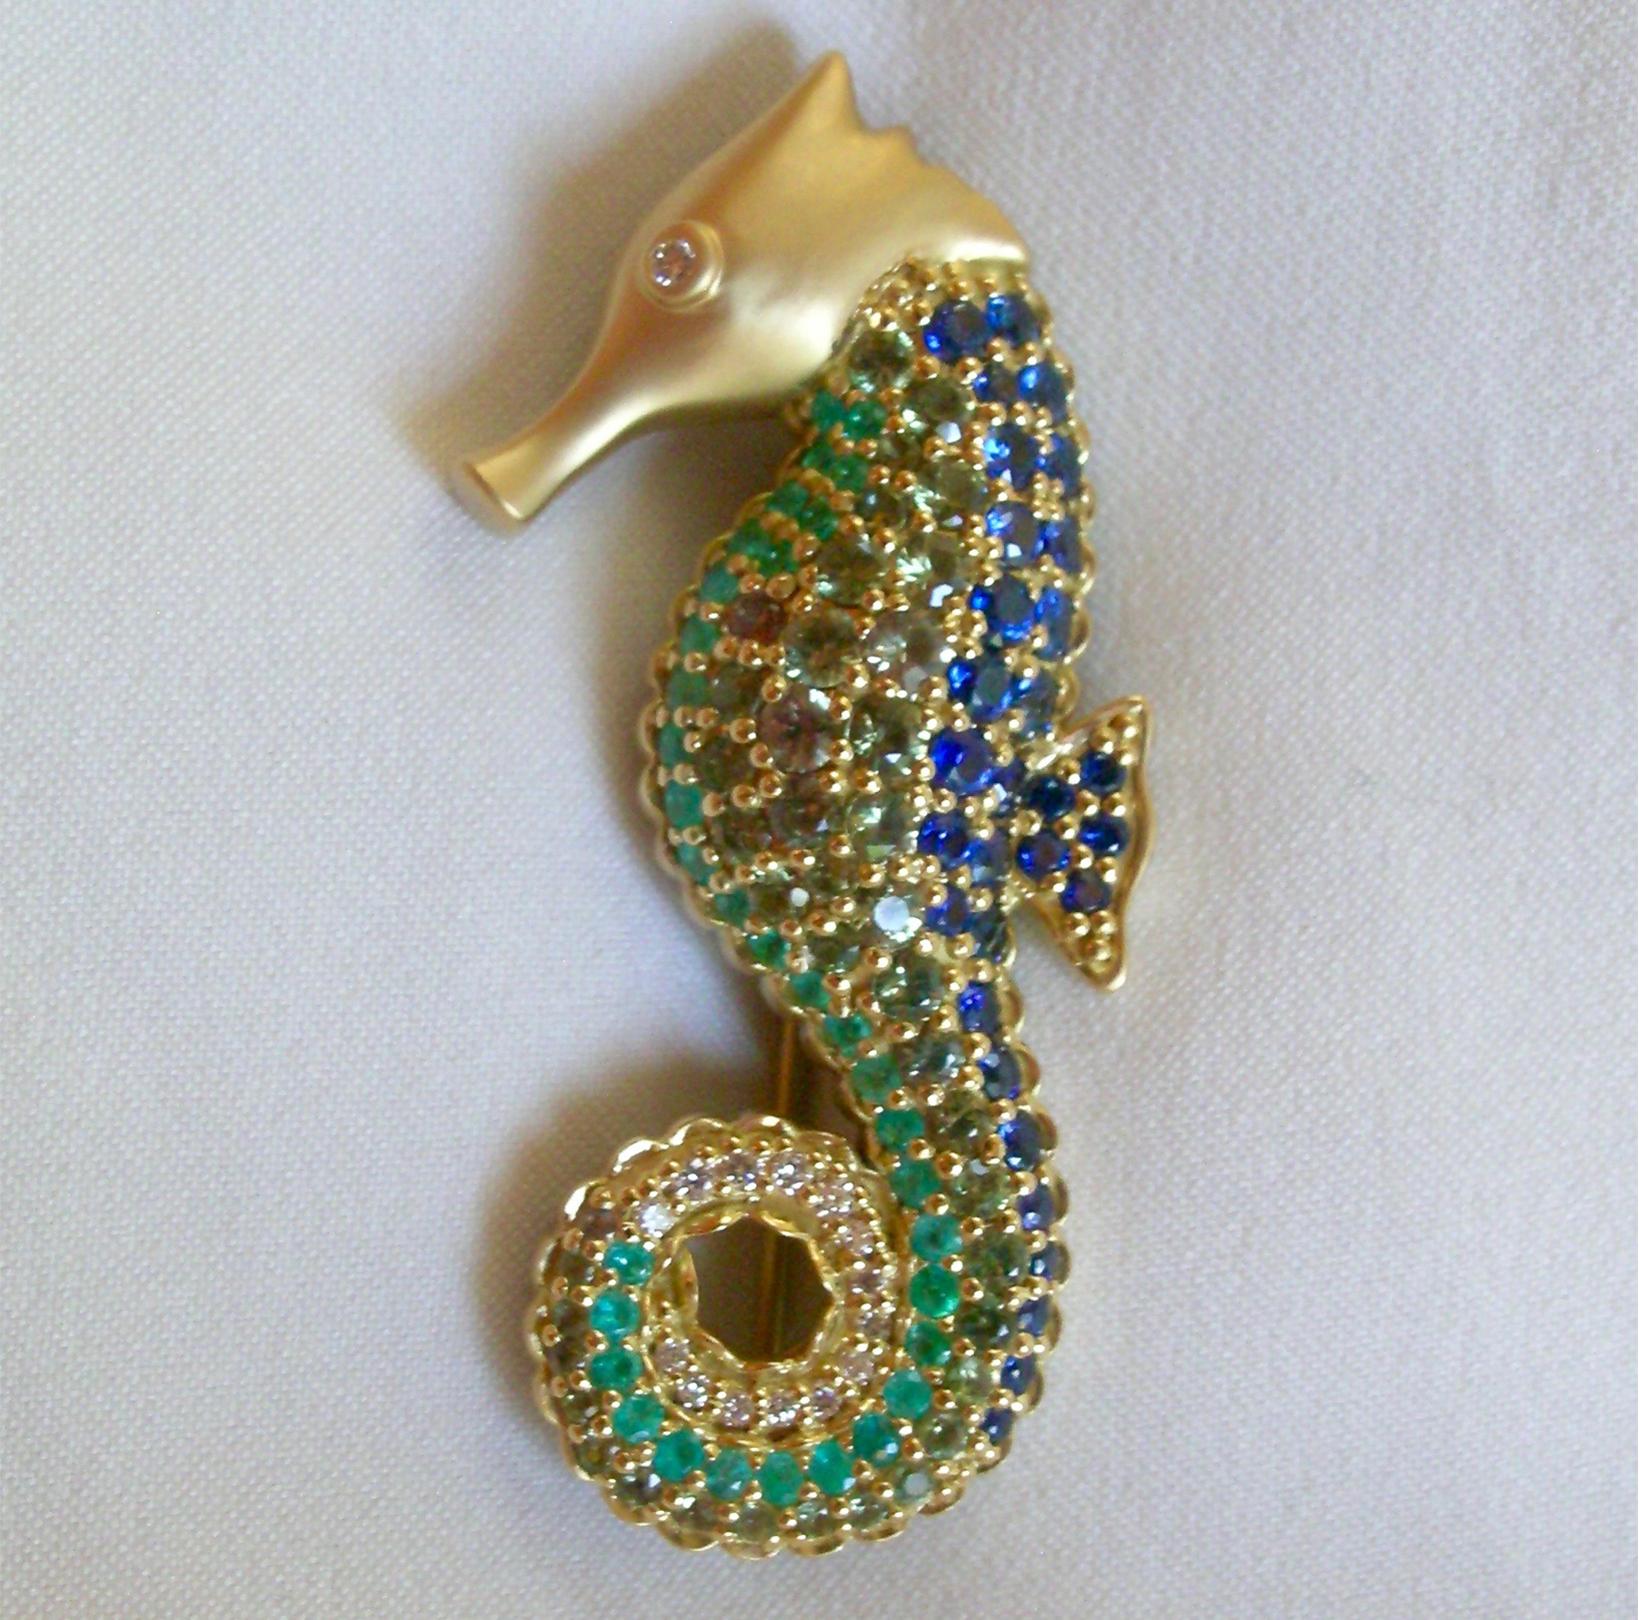 Anyone looking for an amazing, unique and absolutely gorgeous brooch or lapel pin, look no further.  This work of art has over 7 carats of Blue & Green Sapphires, Emeralds and Diamonds.  Pictures are worth a thousand words, so look closely at the